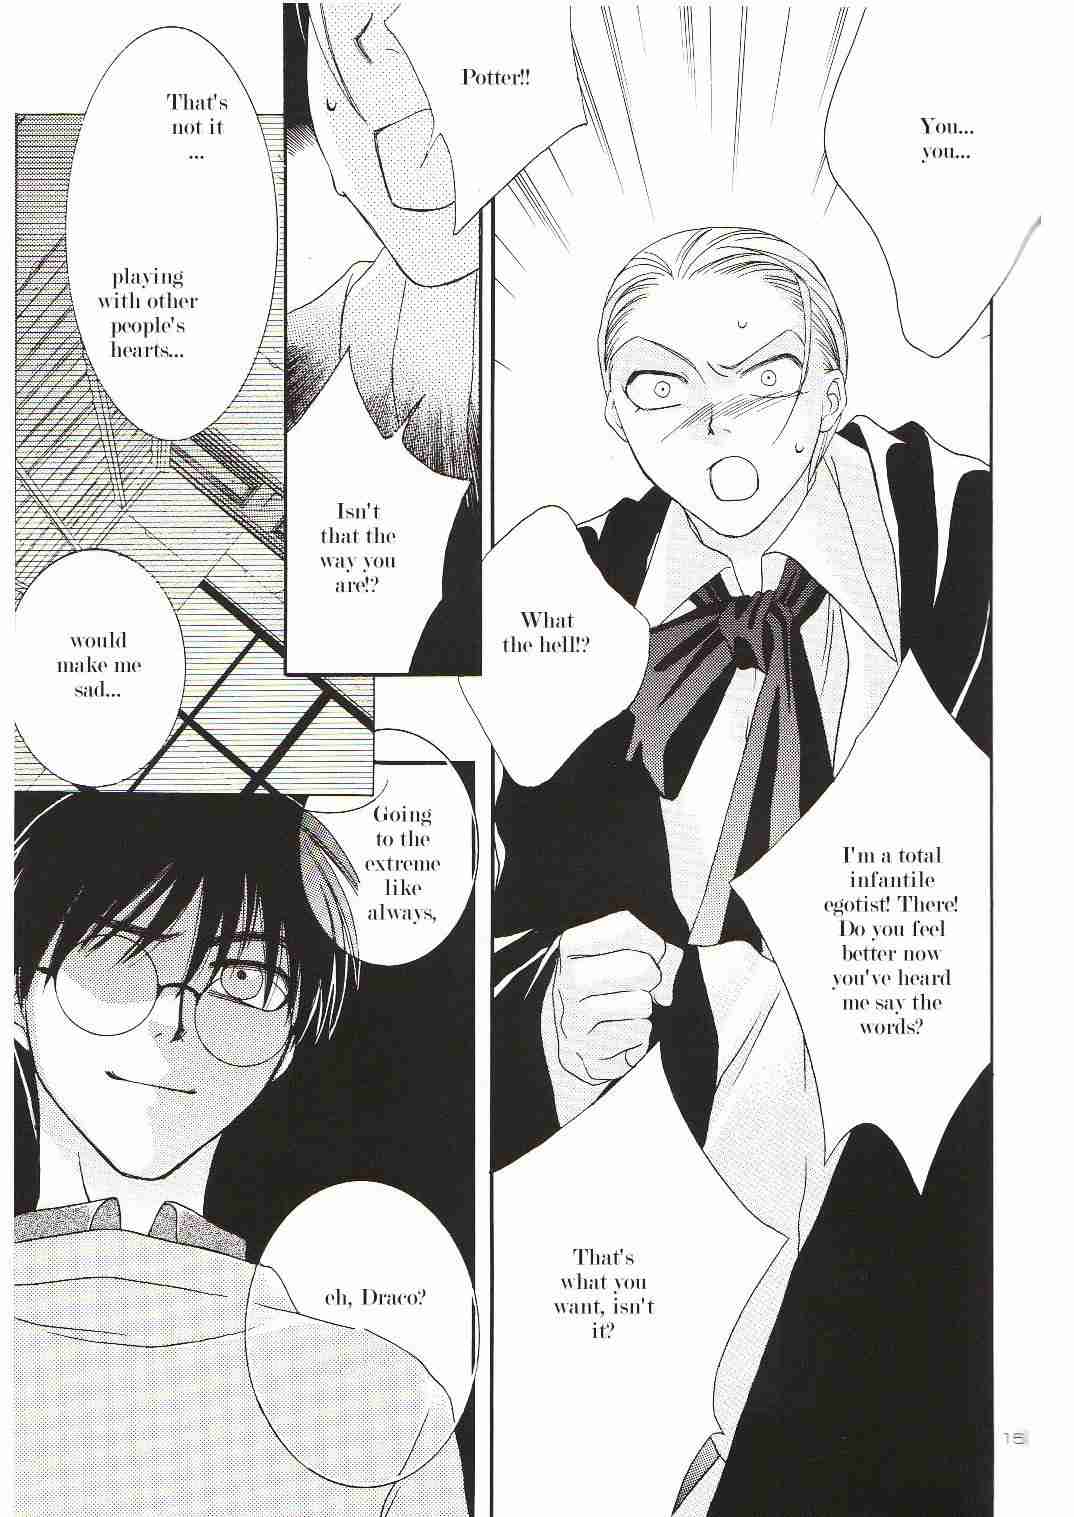 Harry Potter Day after day (Doujinshi) Oneshot